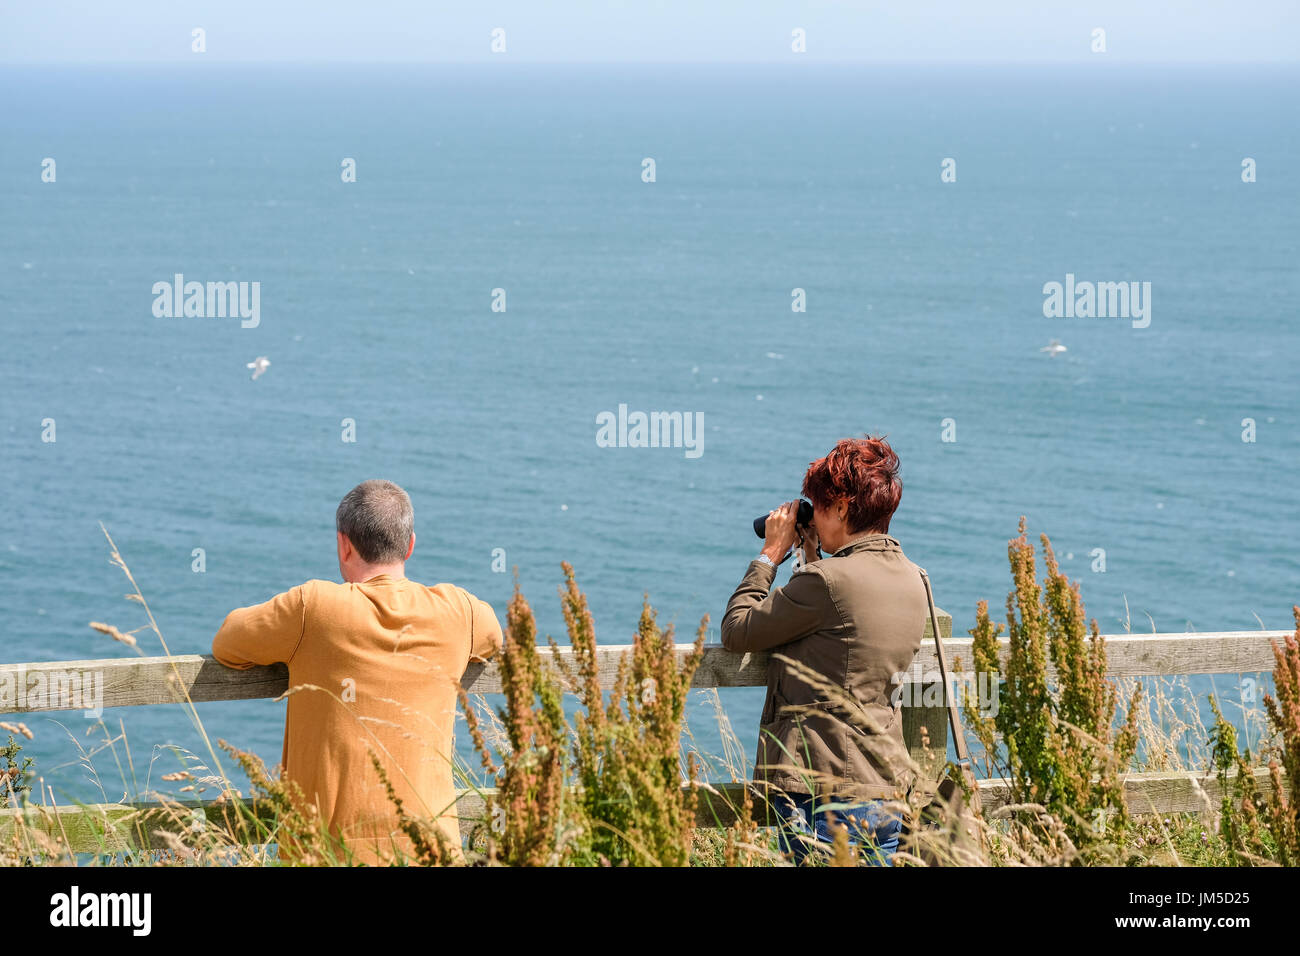 Woman female with binoculars bird watching at a viewpoint at Bempton Cliffs RSPB Reserve, UK. A male companion man is at her side. Stock Photo